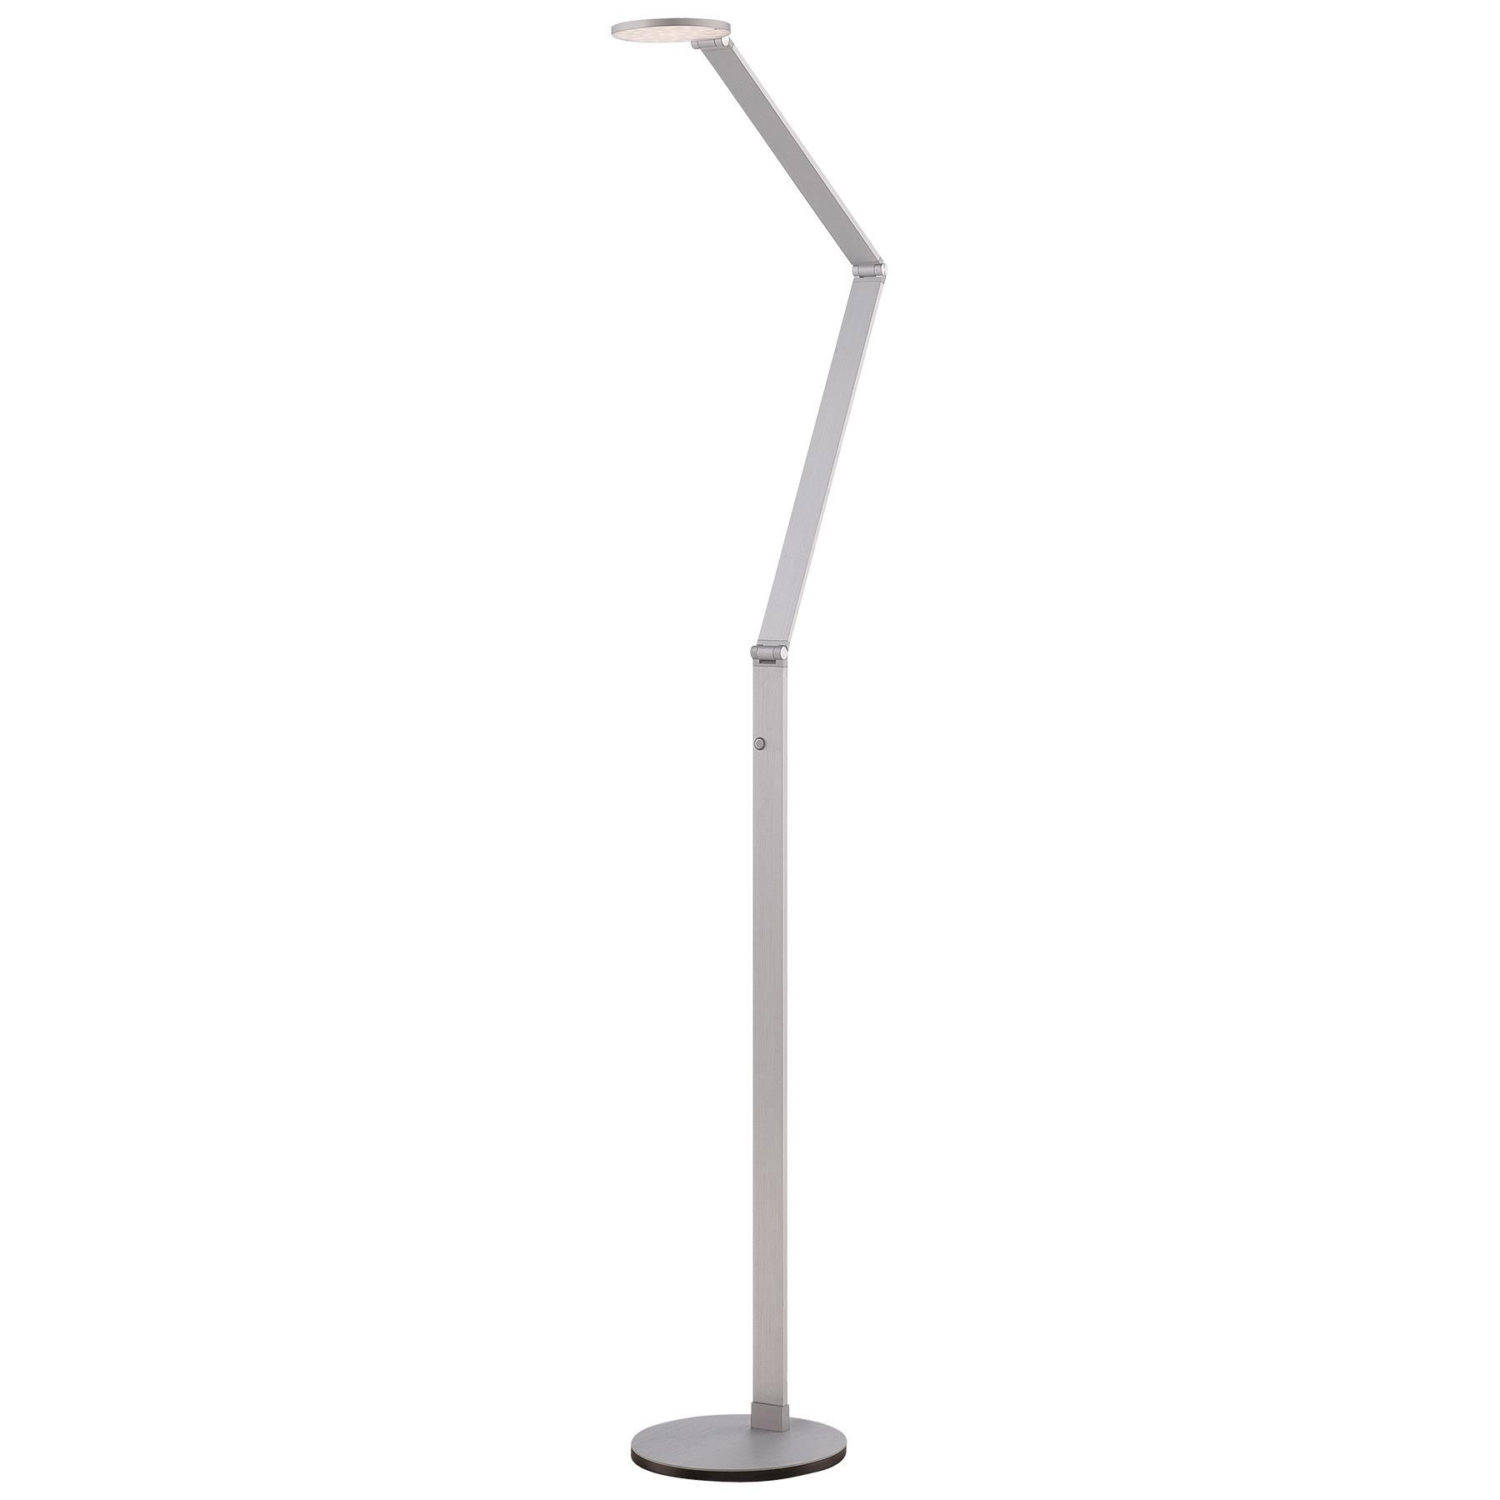 Enchanting Acrylic Floor Lamps Lamp Target Architectures pertaining to dimensions 1500 X 1500